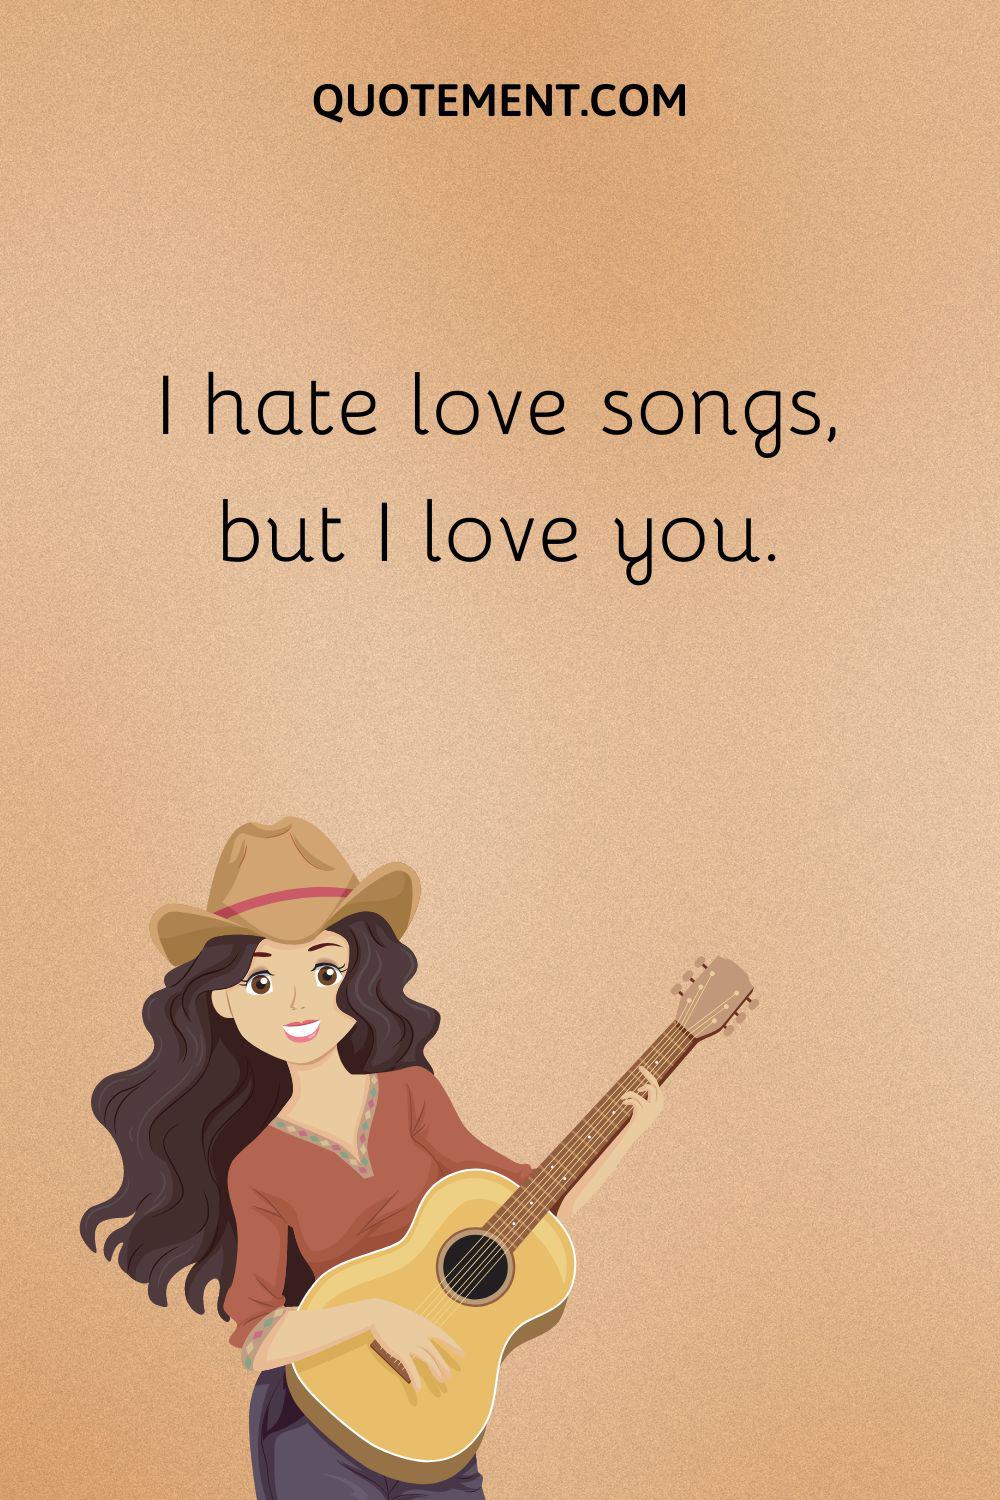 I hate love songs, but I love you